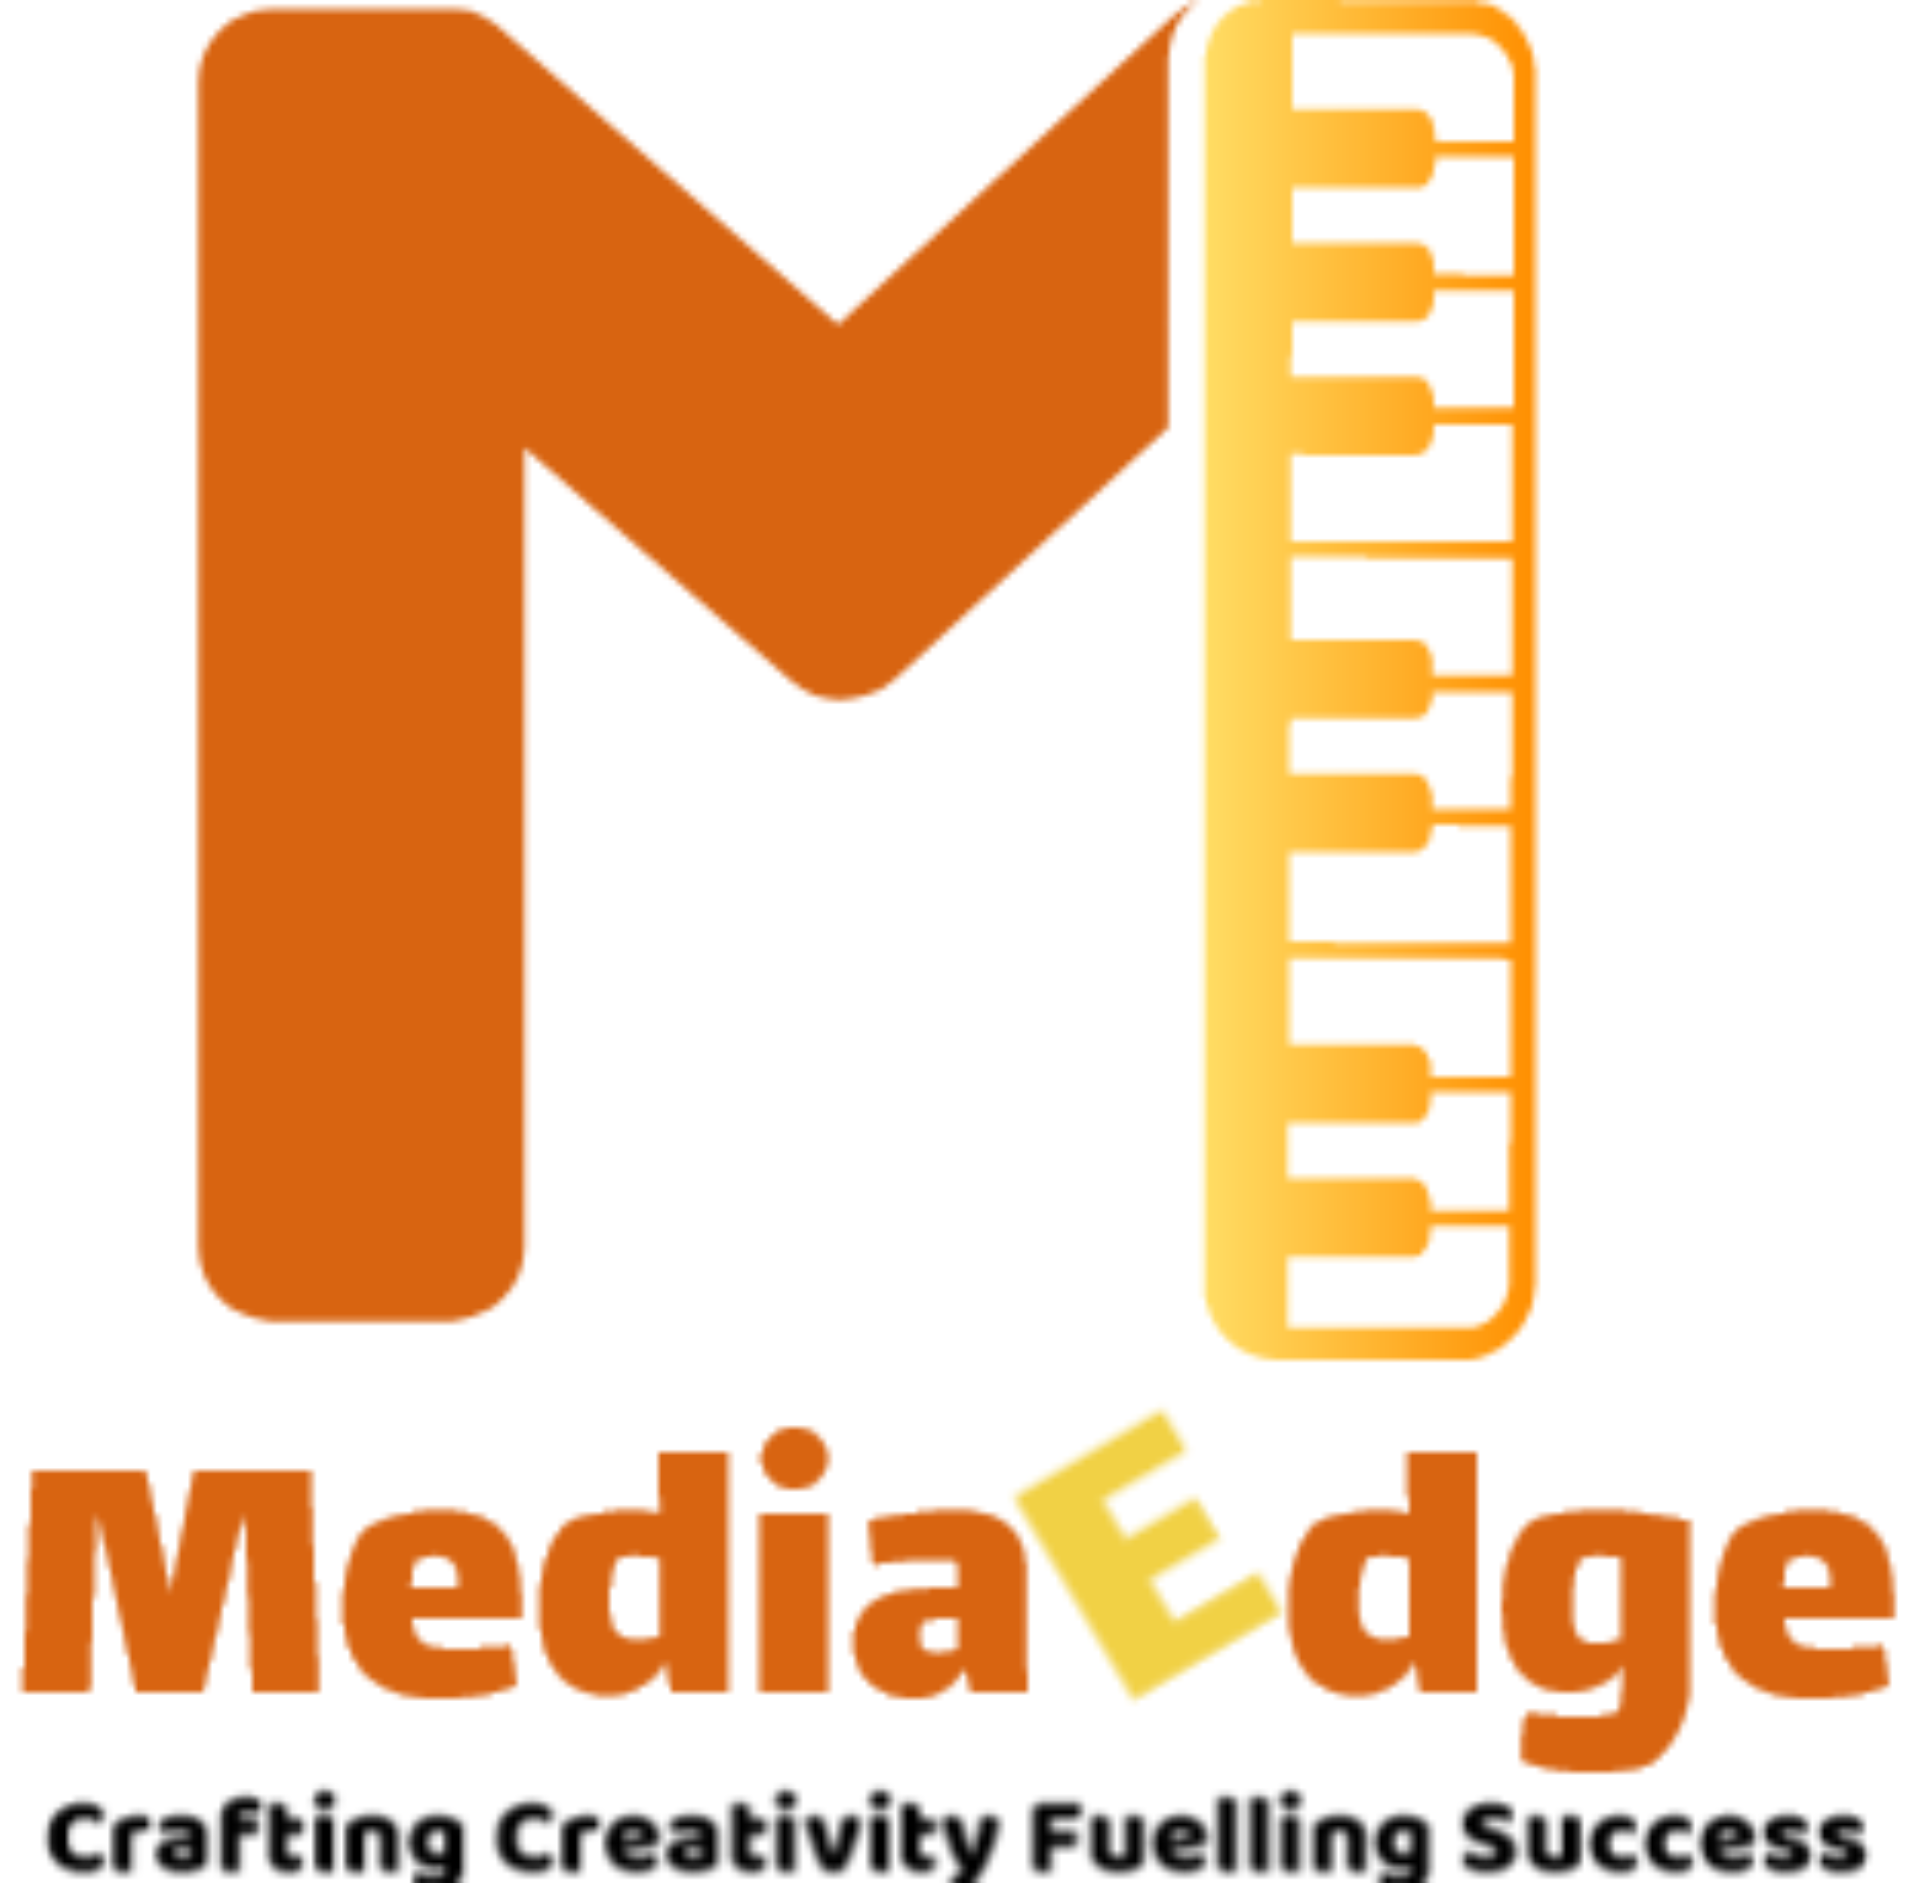 MediaEdge Marketing and Solutions